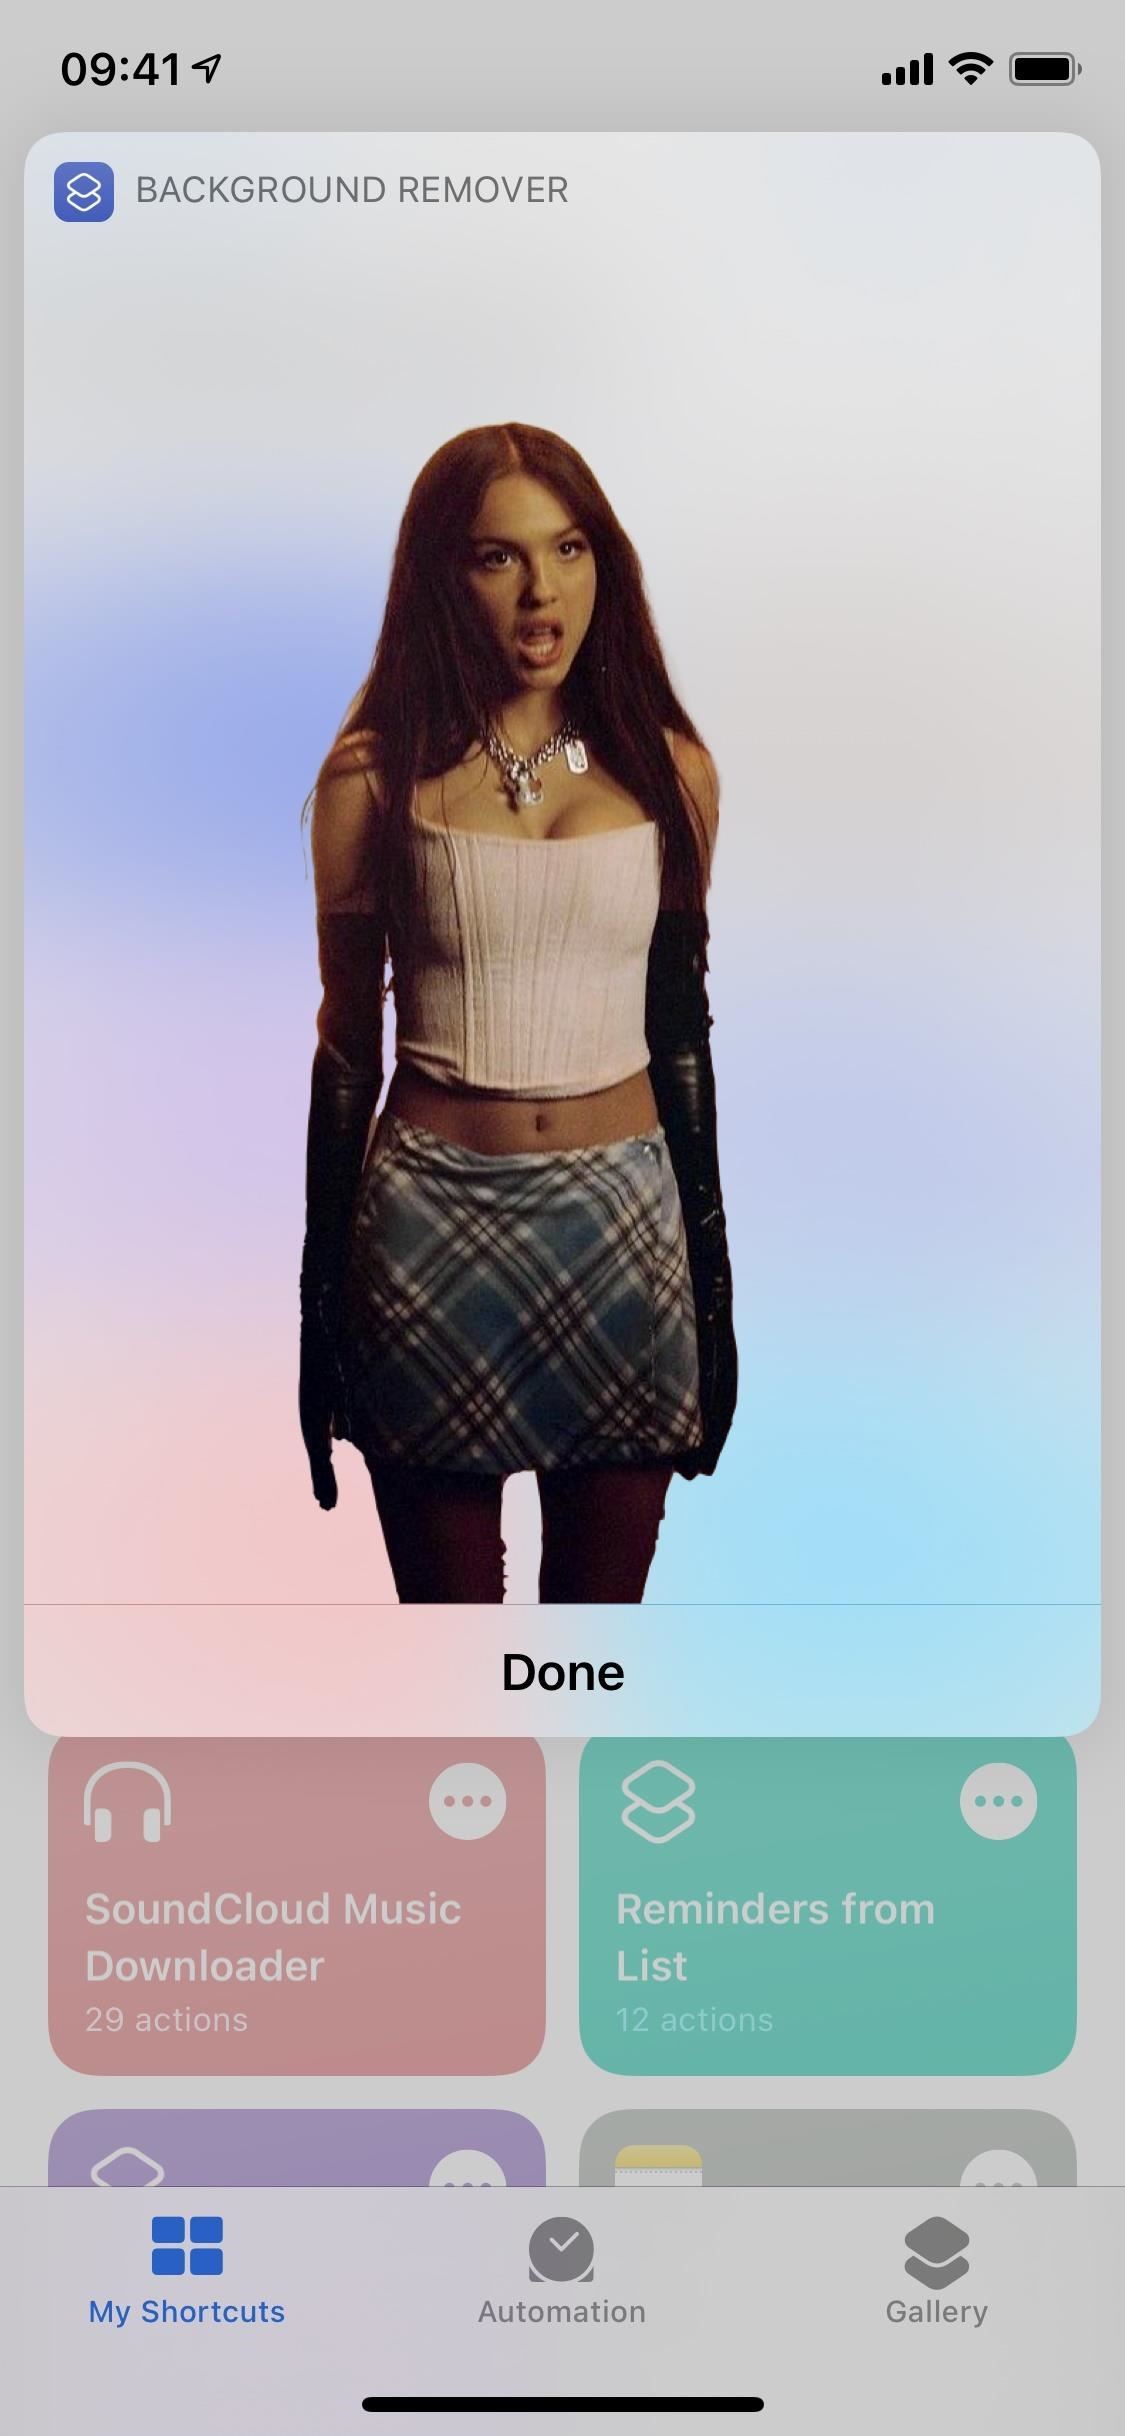 The Fastest Way to Remove the Background from Your iPhone Photos